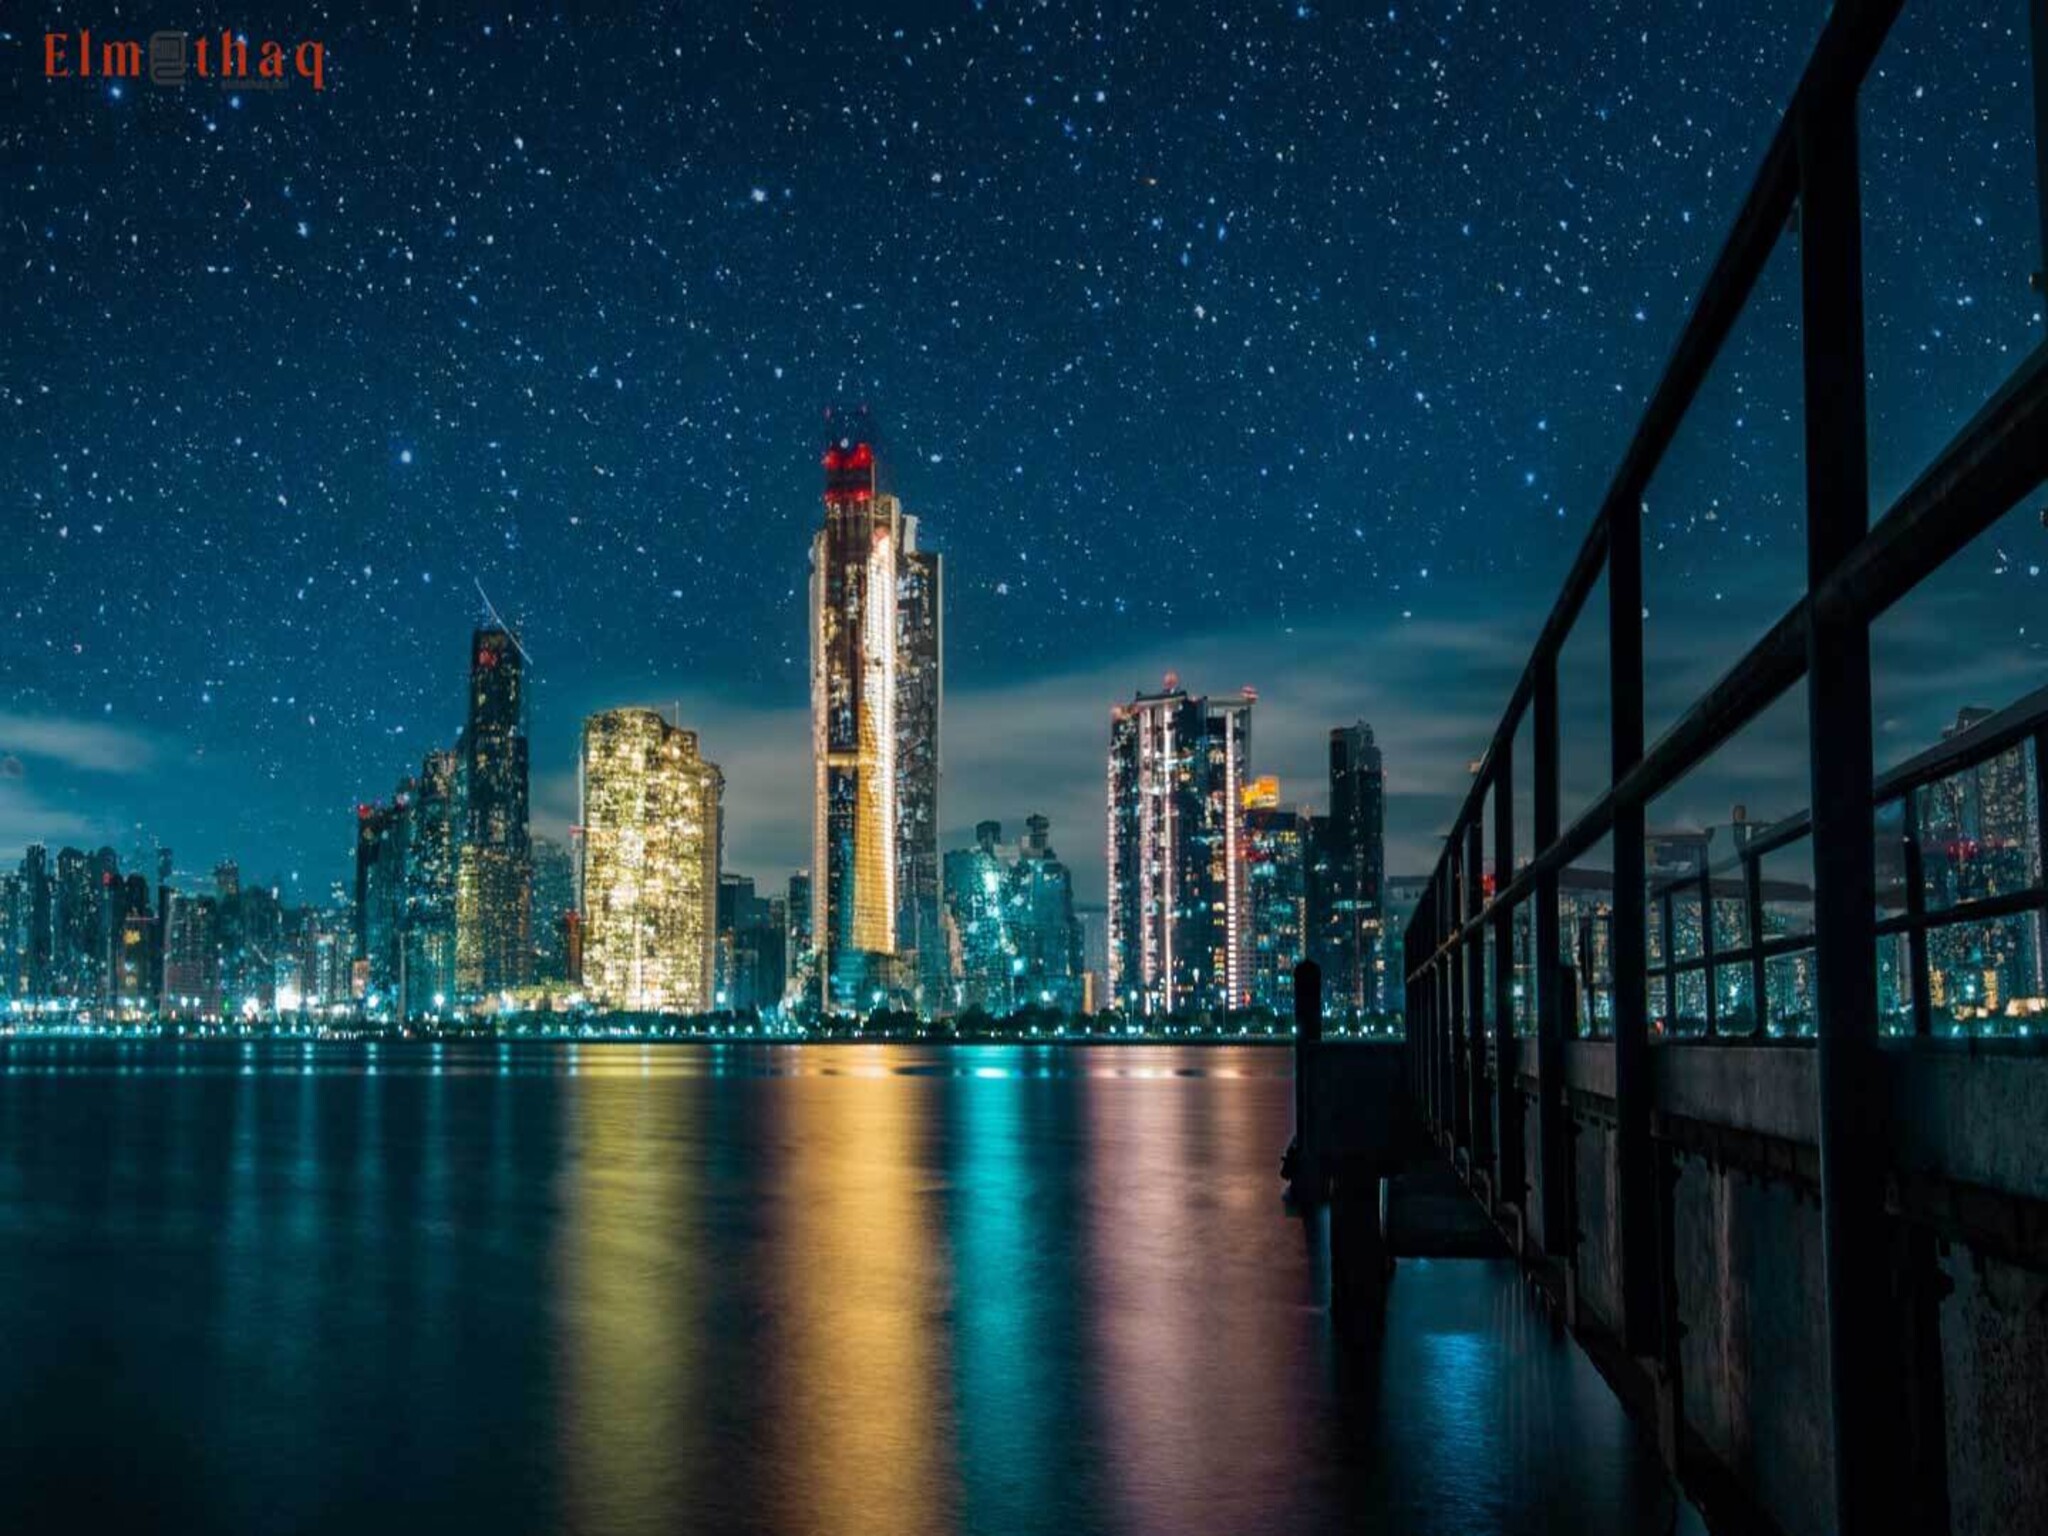 Abu Dhabi announces "Dark Sky" policy aimed at combating light pollution